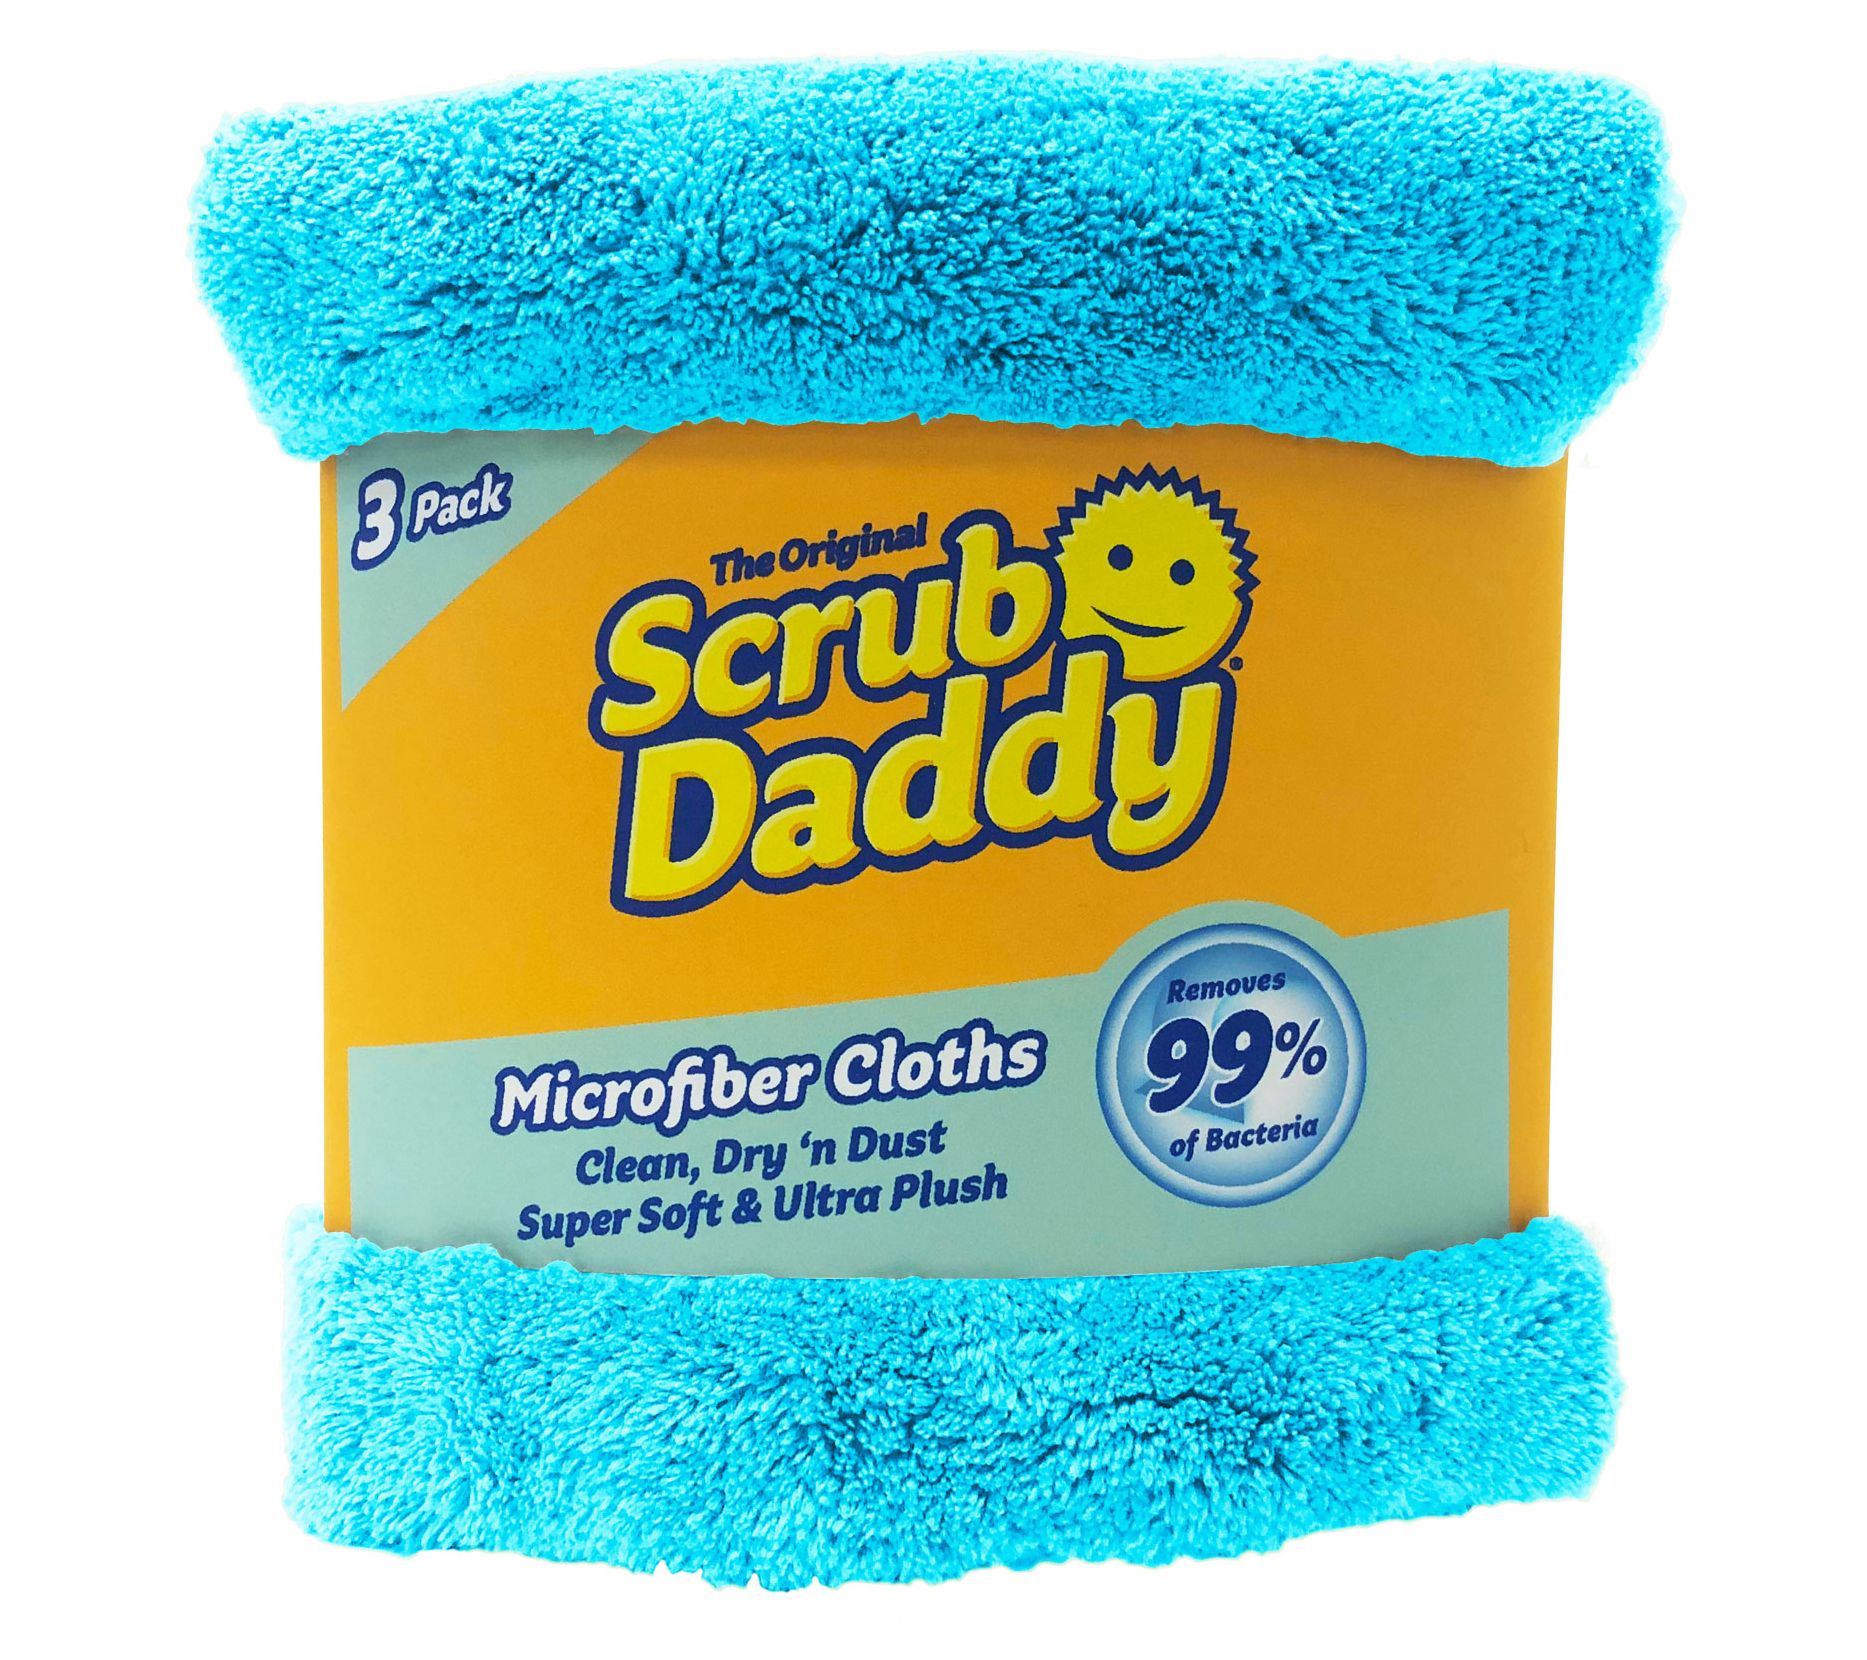  Scrub Daddy Microfiber Cloths - All Purpose Super Soft & Ultra  Plush Microfiber Towels - Contains Grey & Yellow Cleaning Rags (2 Pack) :  Health & Household